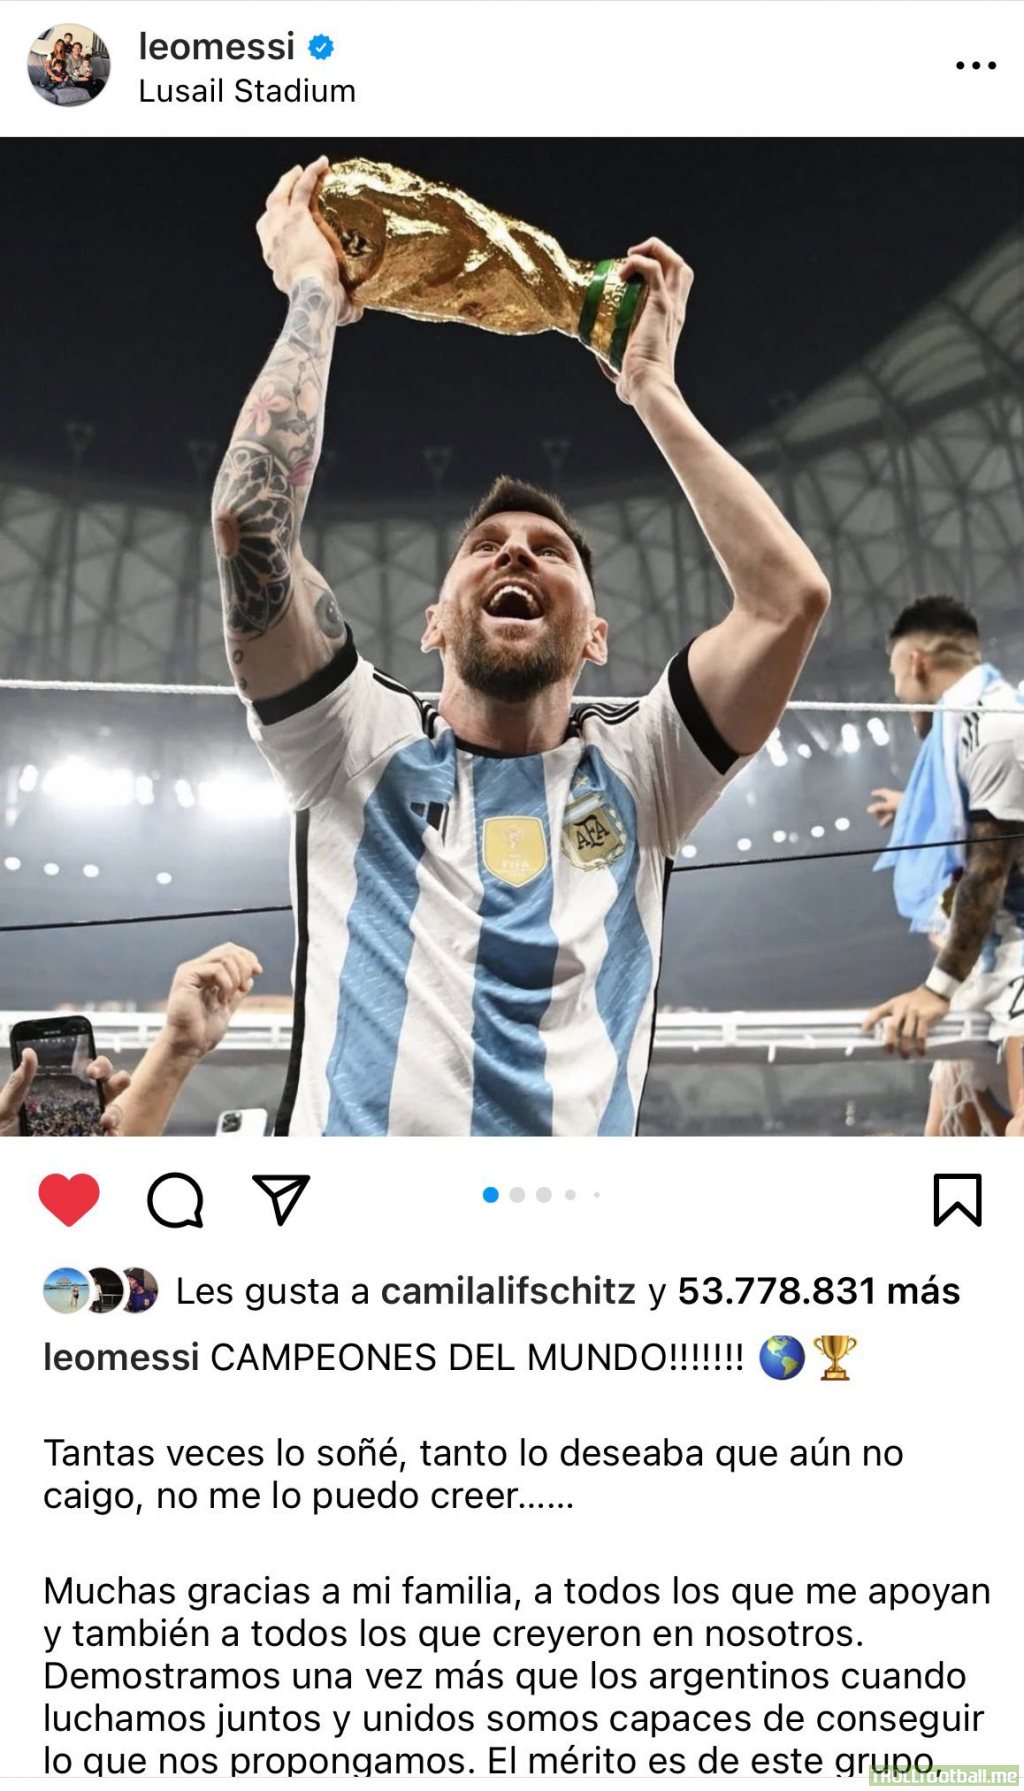 Messi's post after his World Cup victory became Instagram's most liked post by a sportsperson in history. 2M likes away from becoming the most liked post on Instagram.